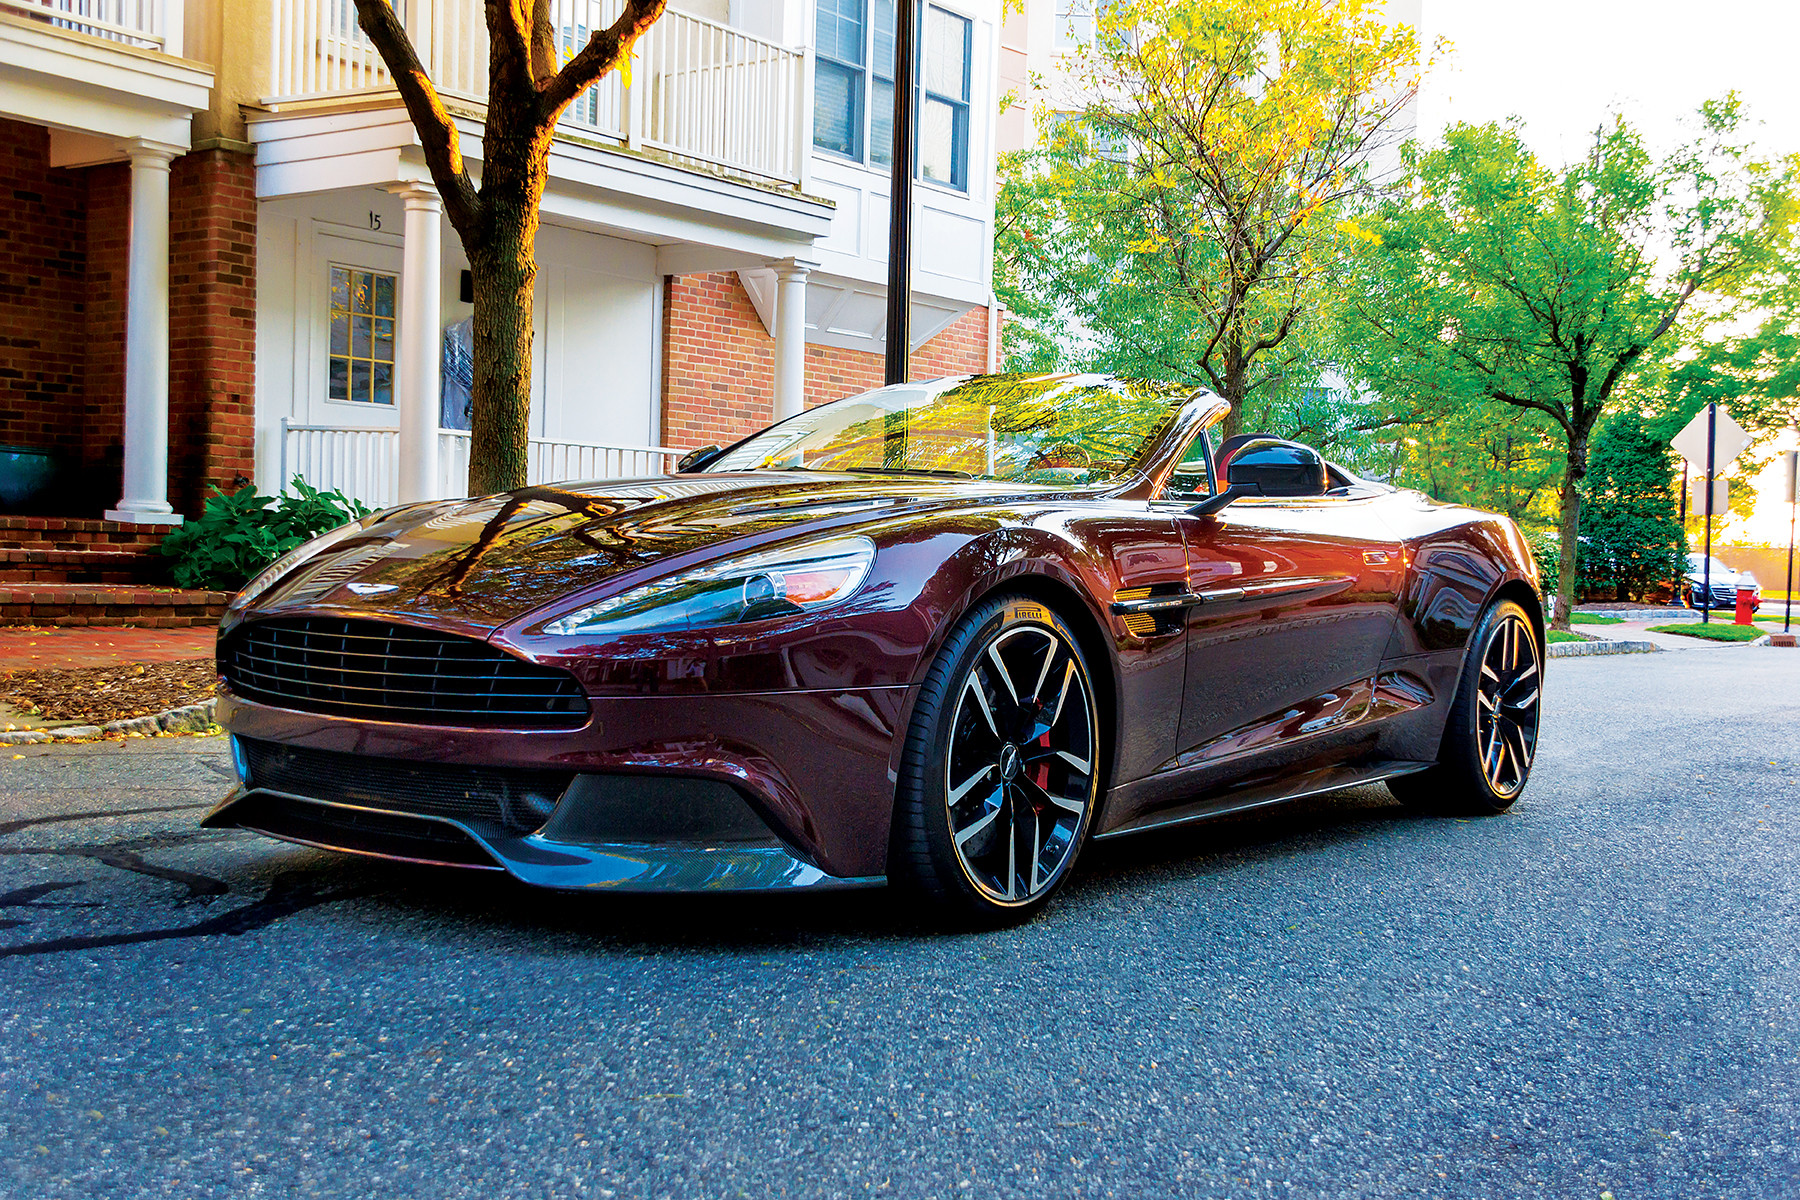 The Majesty Of The Open Air: The Aston Martin Vanquish Volante